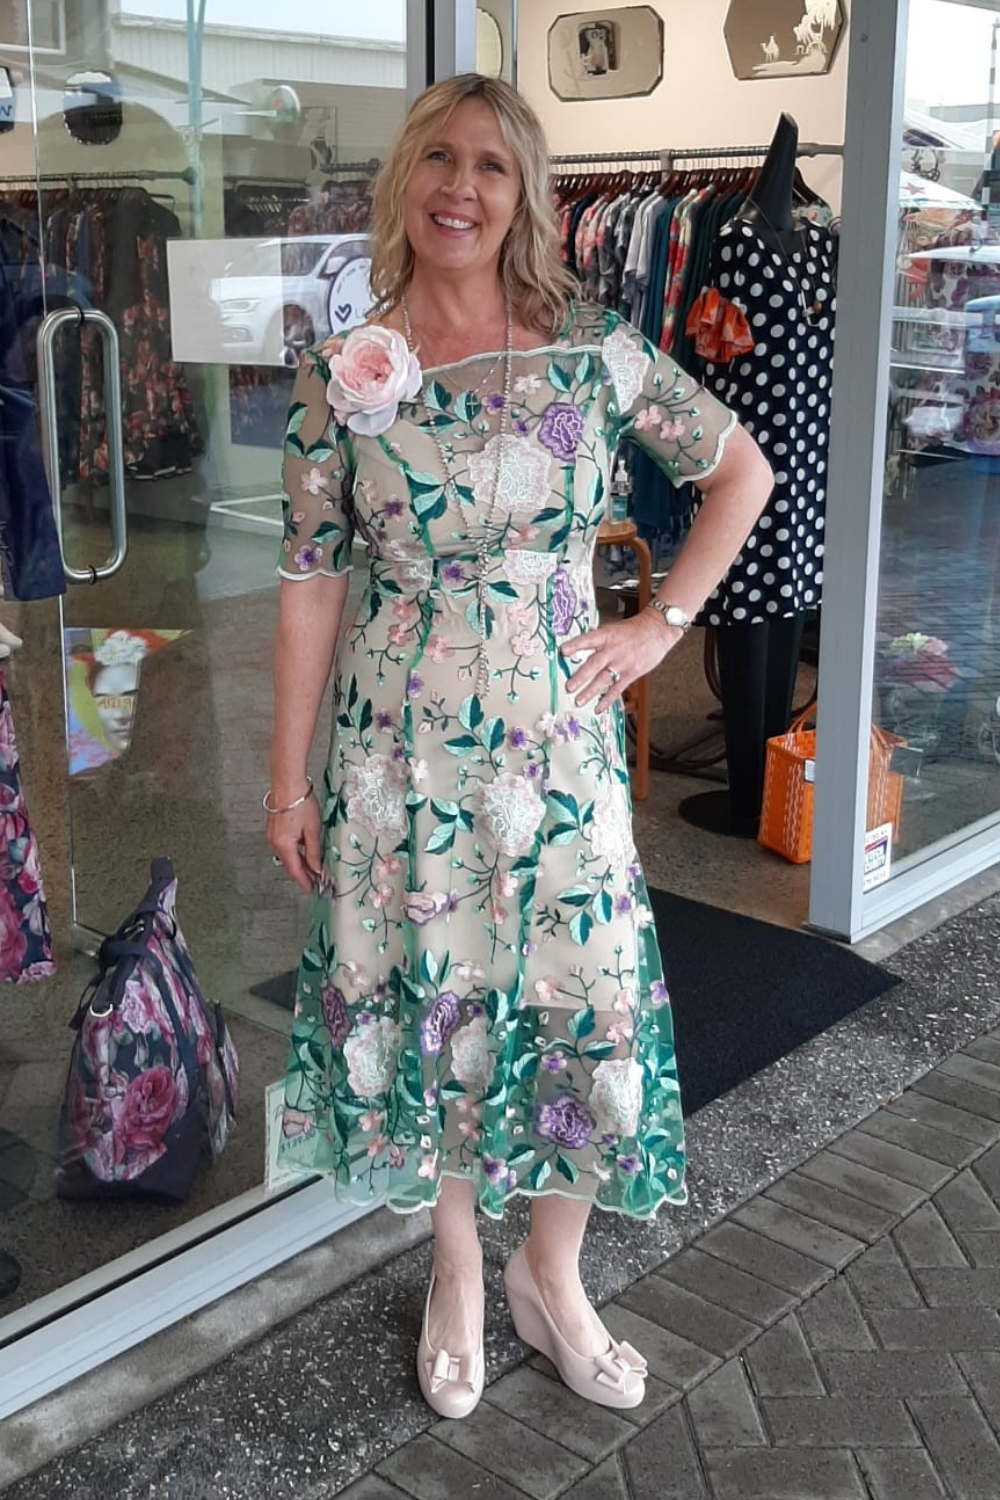 Kelly in Spring Angel embroidered mesh dress by Annah Stretton